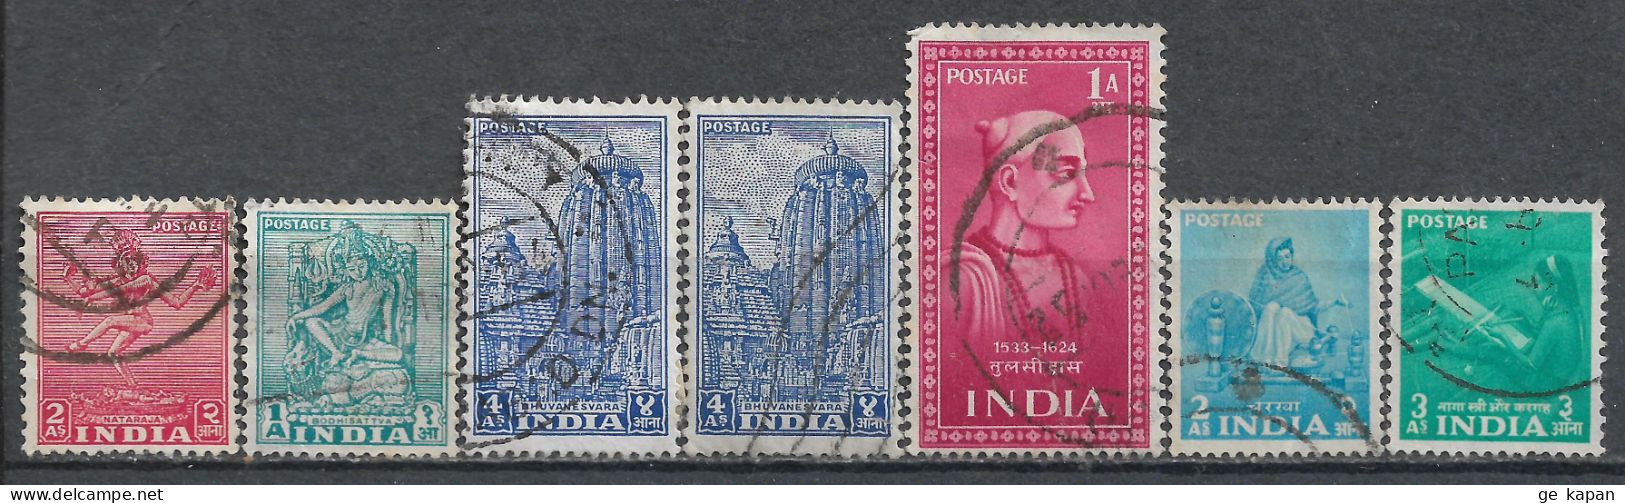 1949-1955 INDIA Set Of 7 Used Stamps (Michel # 195,215,217,222,242,243) - Used Stamps